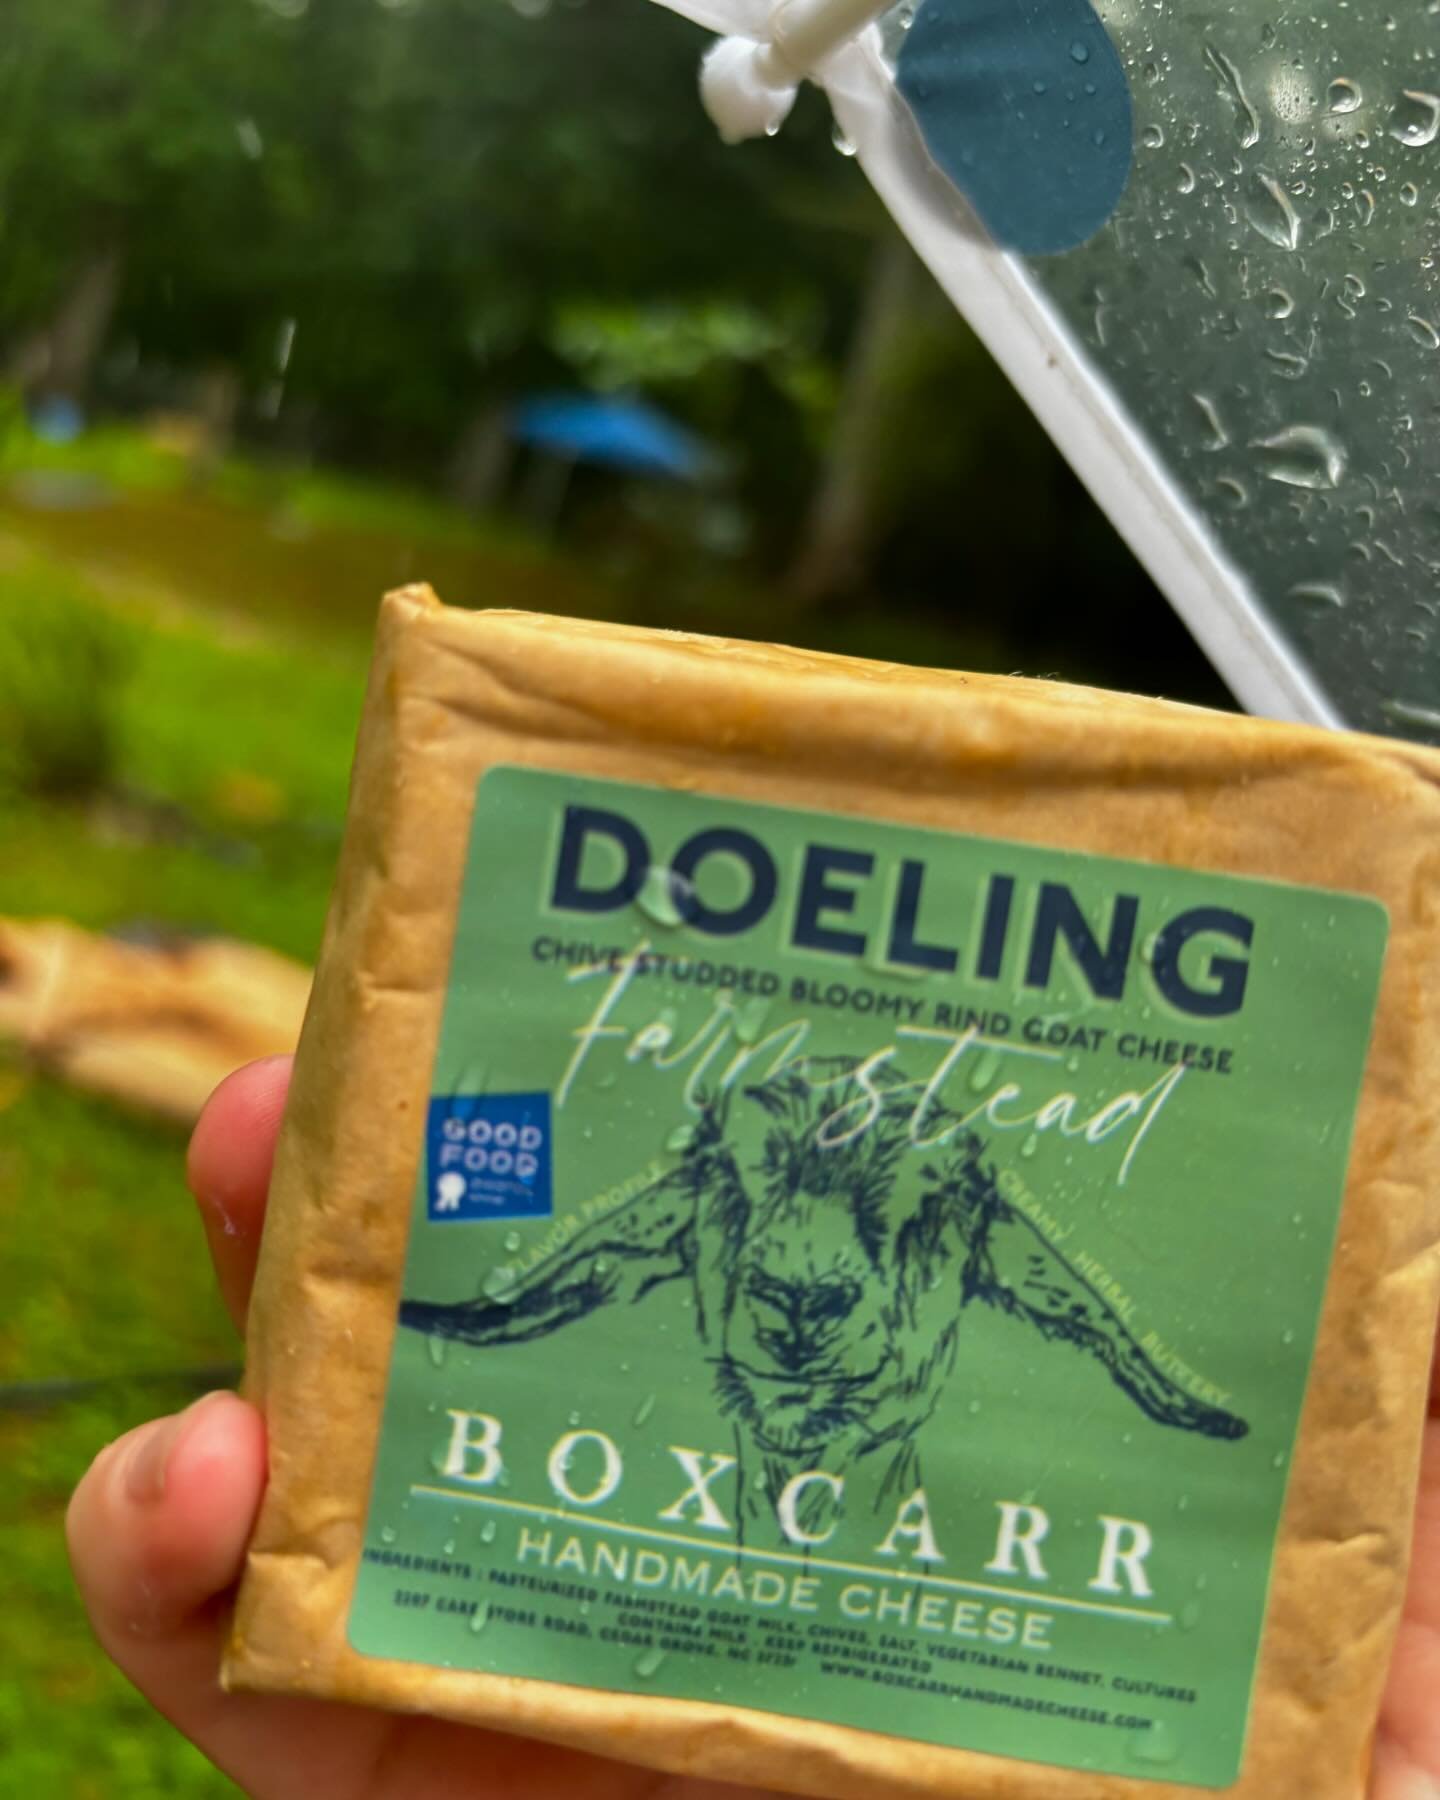 It might be rainy tomorrow but we will be at 4 different farmers markets rain or shine! The @caryfarmersmkt the @enoriverfarmersmarket the @southdurhamfarmersmarket and the @durhamfarmersmarket !  Come and get your delicious #boxcarrhandmadecheese ! 